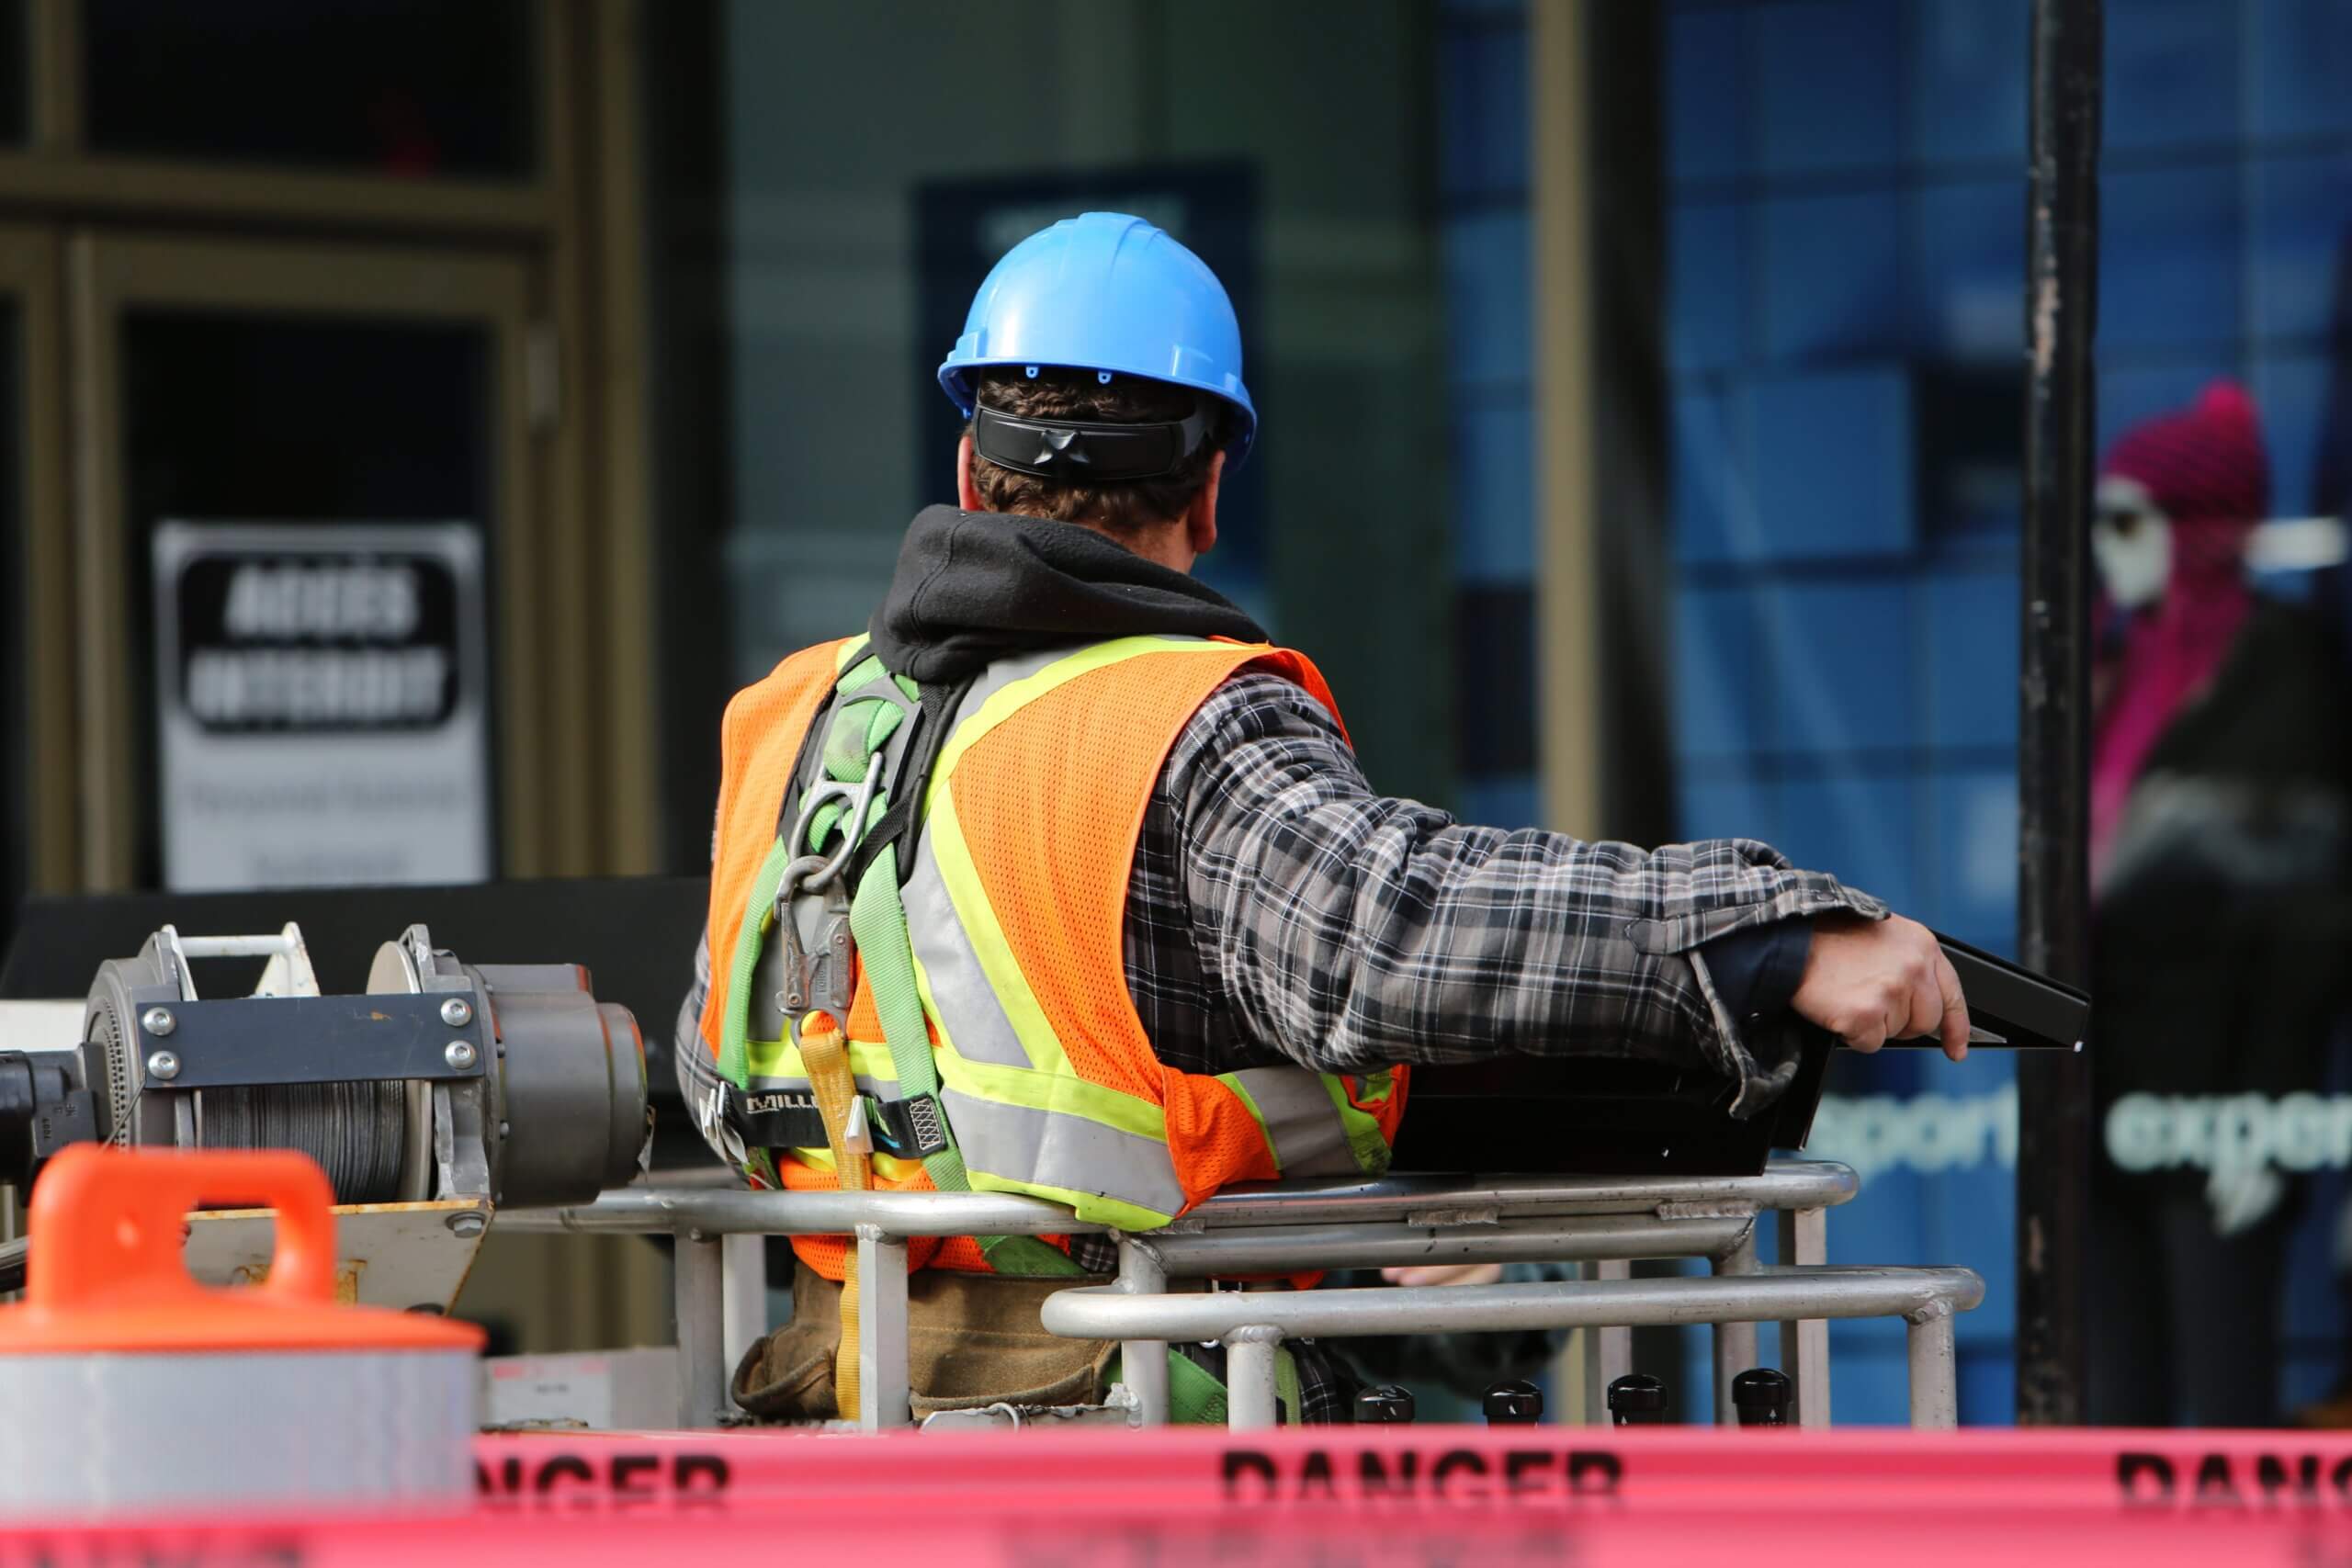 Worker wearing health and safety gear.